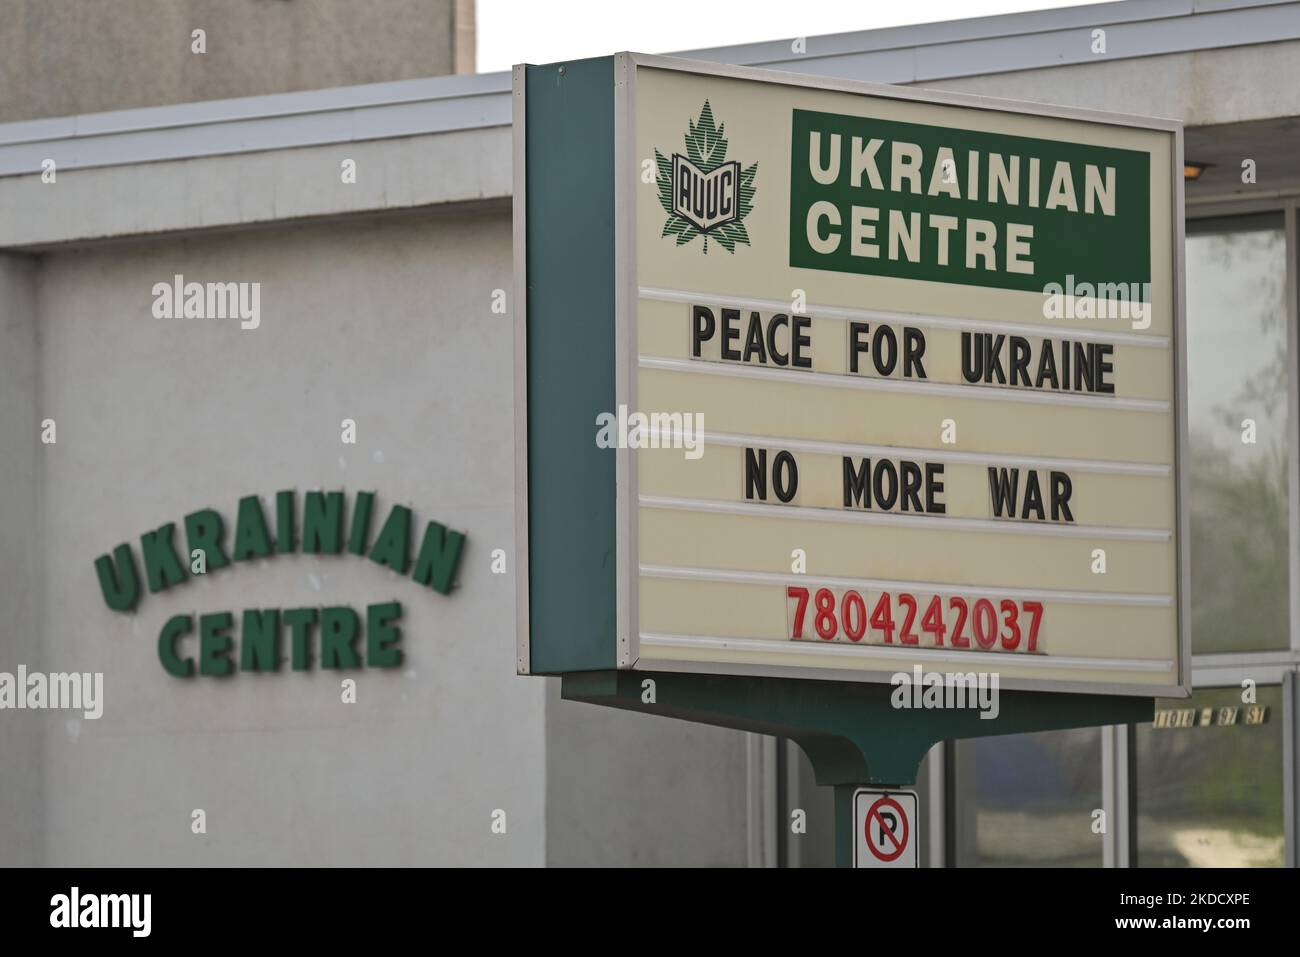 Peace for Ukraine and No More War messages on the board at the Ukrainian Center in Edmonton. Friday, May 20, 2022, in Edmonton, Alberta, Canada. (Photo by Artur Widak/NurPhoto) Stock Photo